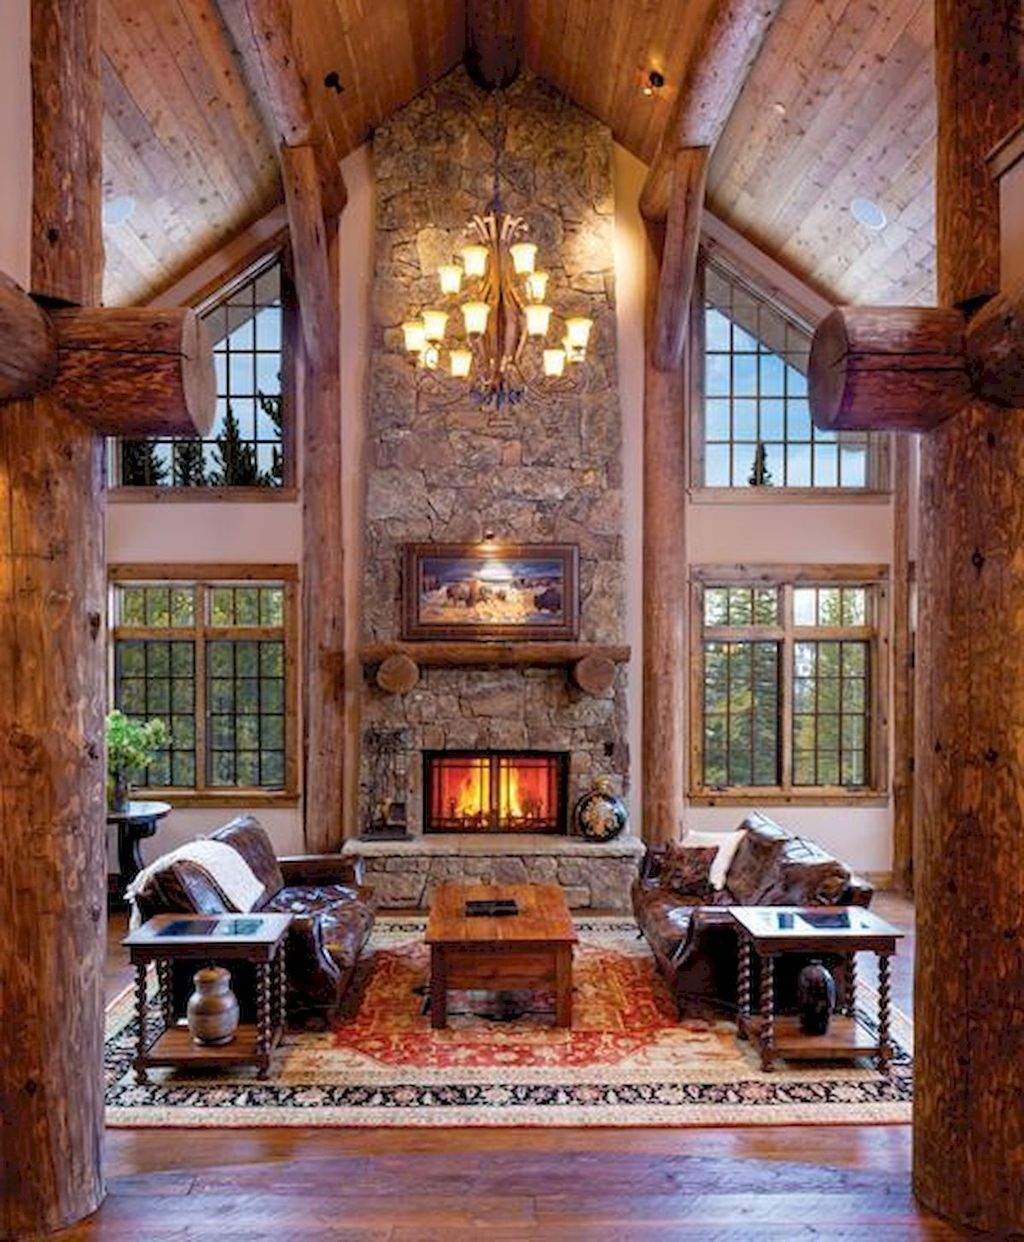 Gorgeous Log Cabin Style Home Interior Design16